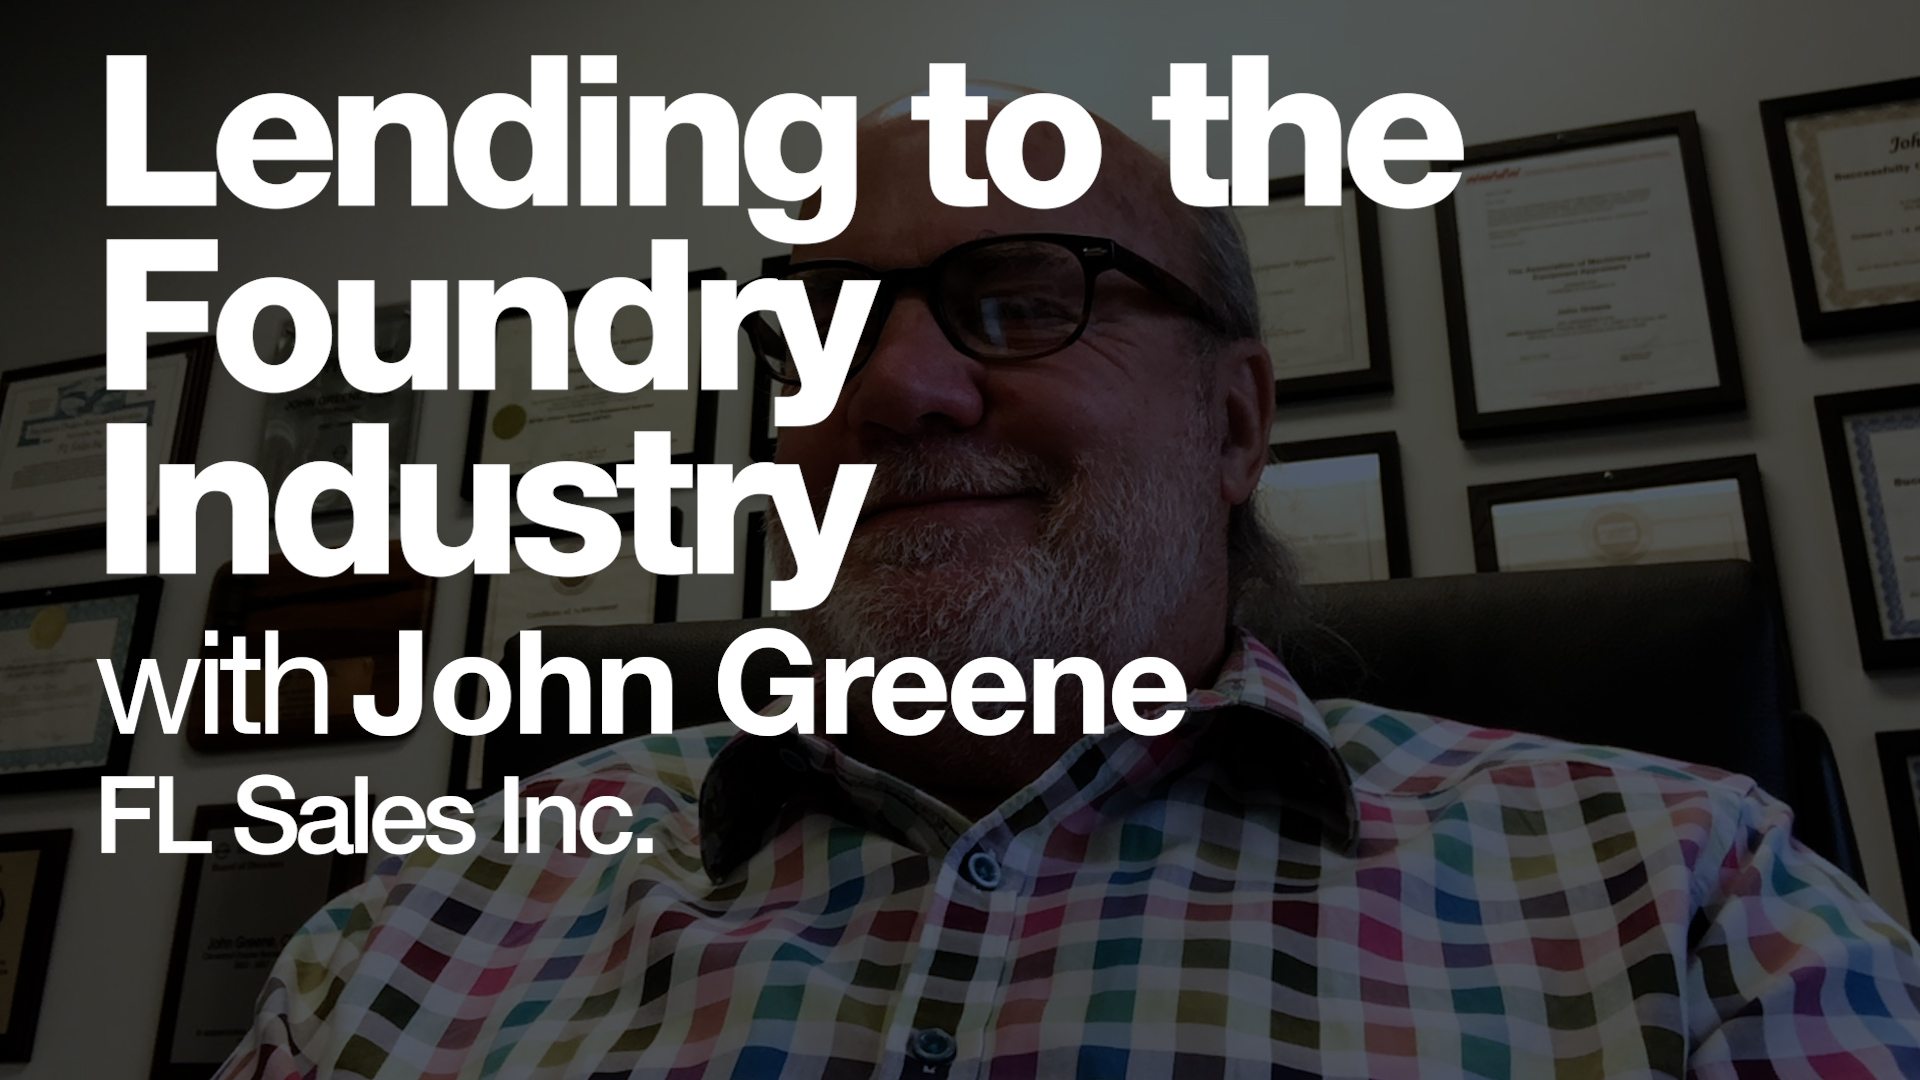 Lending to the Foundry Industry with John Greene